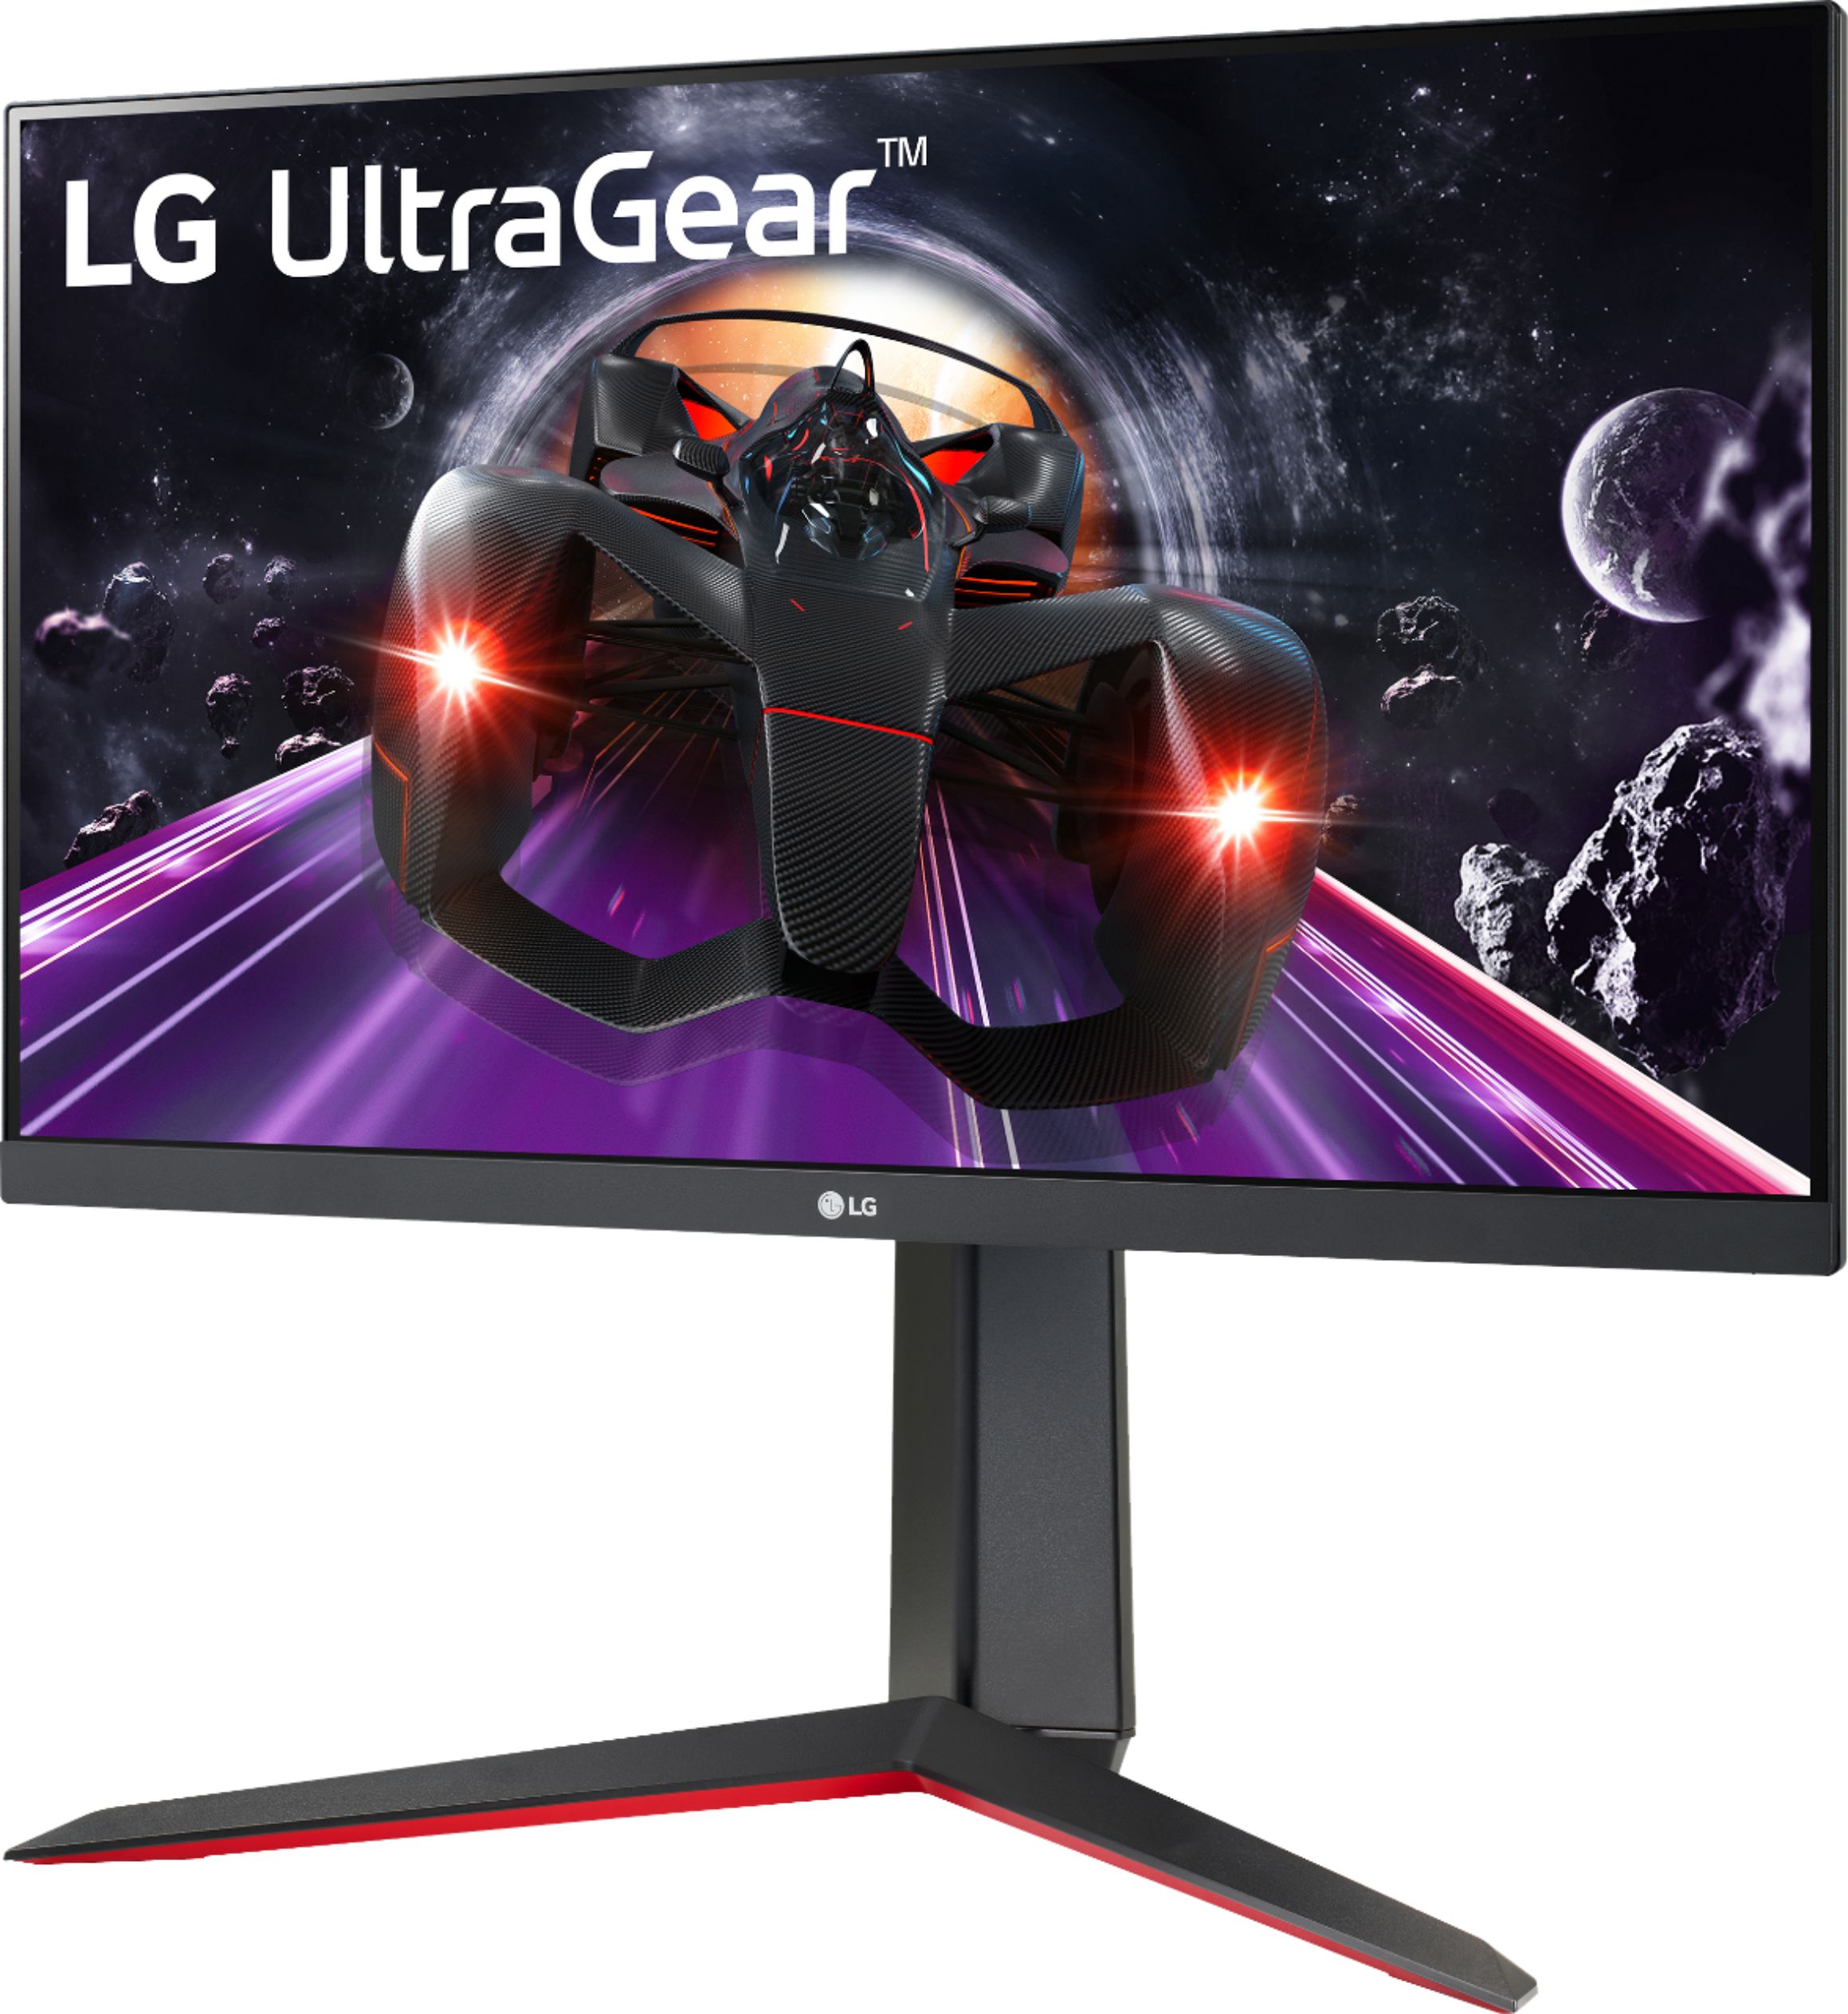 Left View: LG - Geek Squad Certified Refurbished UltraGear 24" LED FHD FreeSync Monitor with HDR